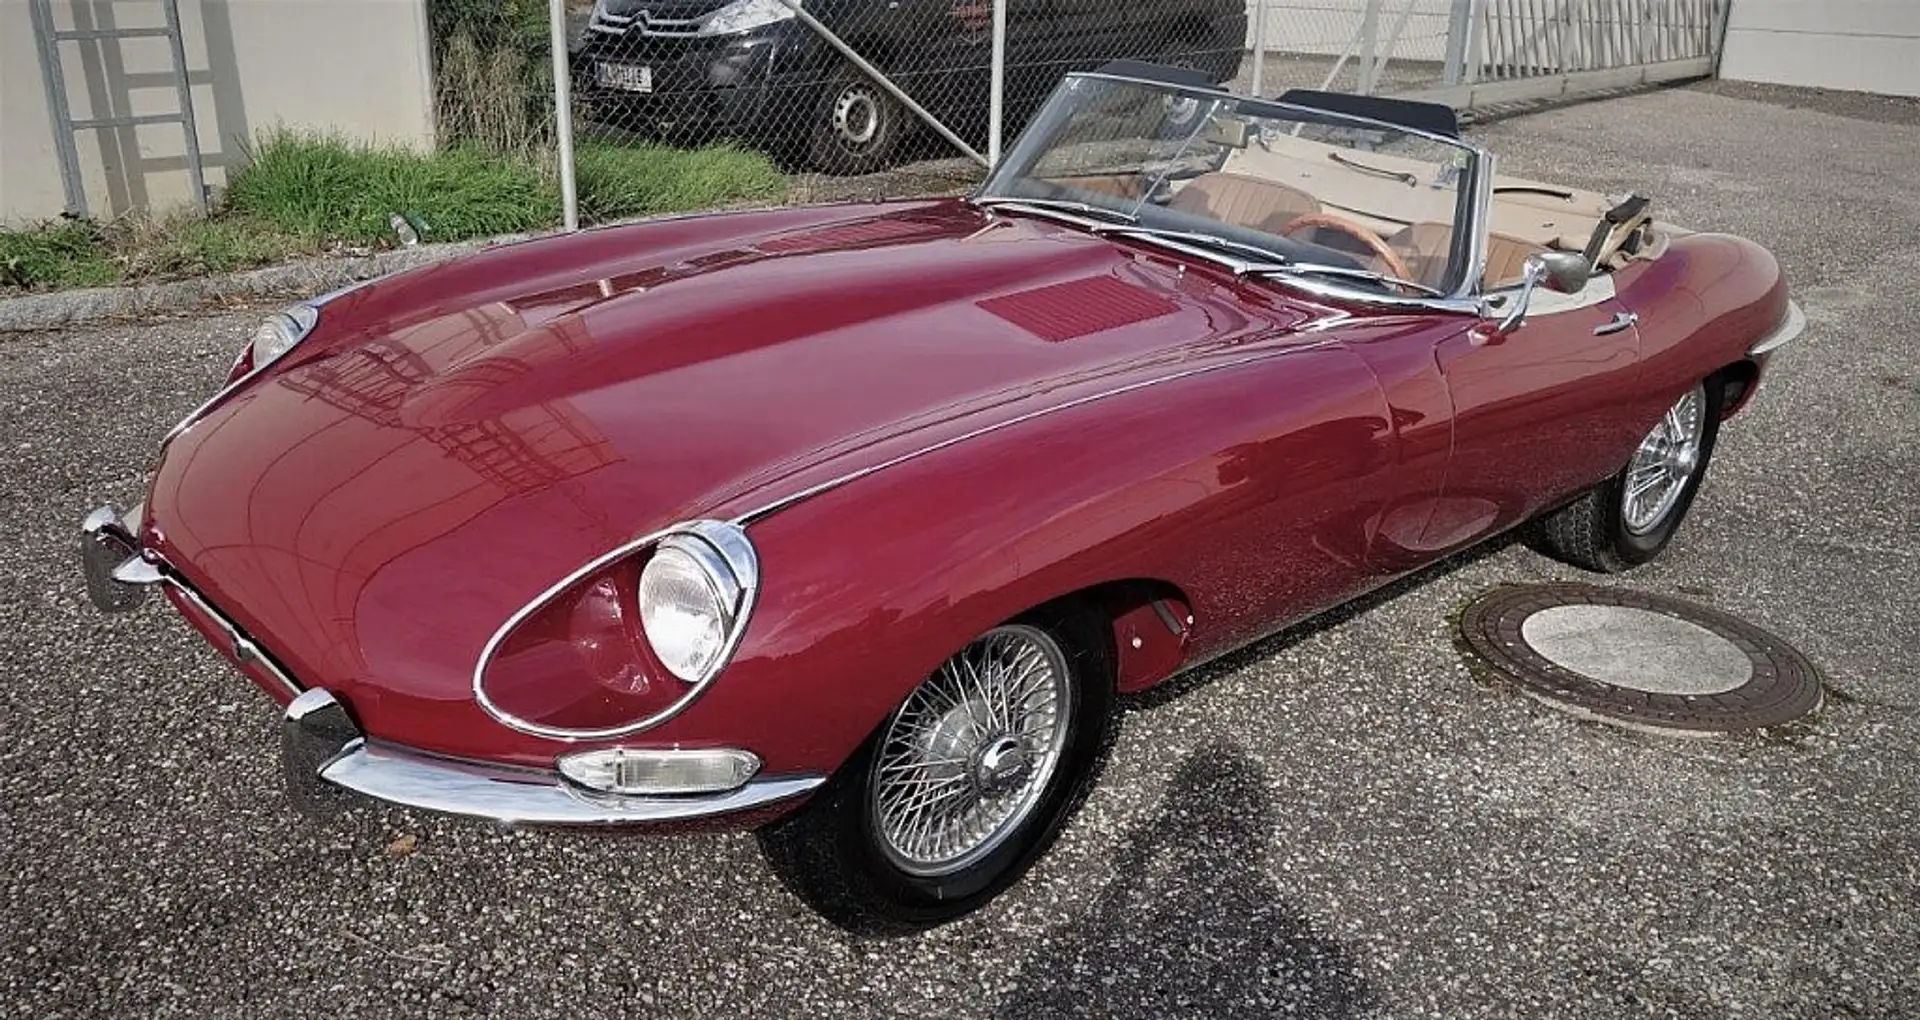 Jaguar E-Type 4.2 1 Serie 1.5 Roadster OTS "Matching Numbers" Red - 1